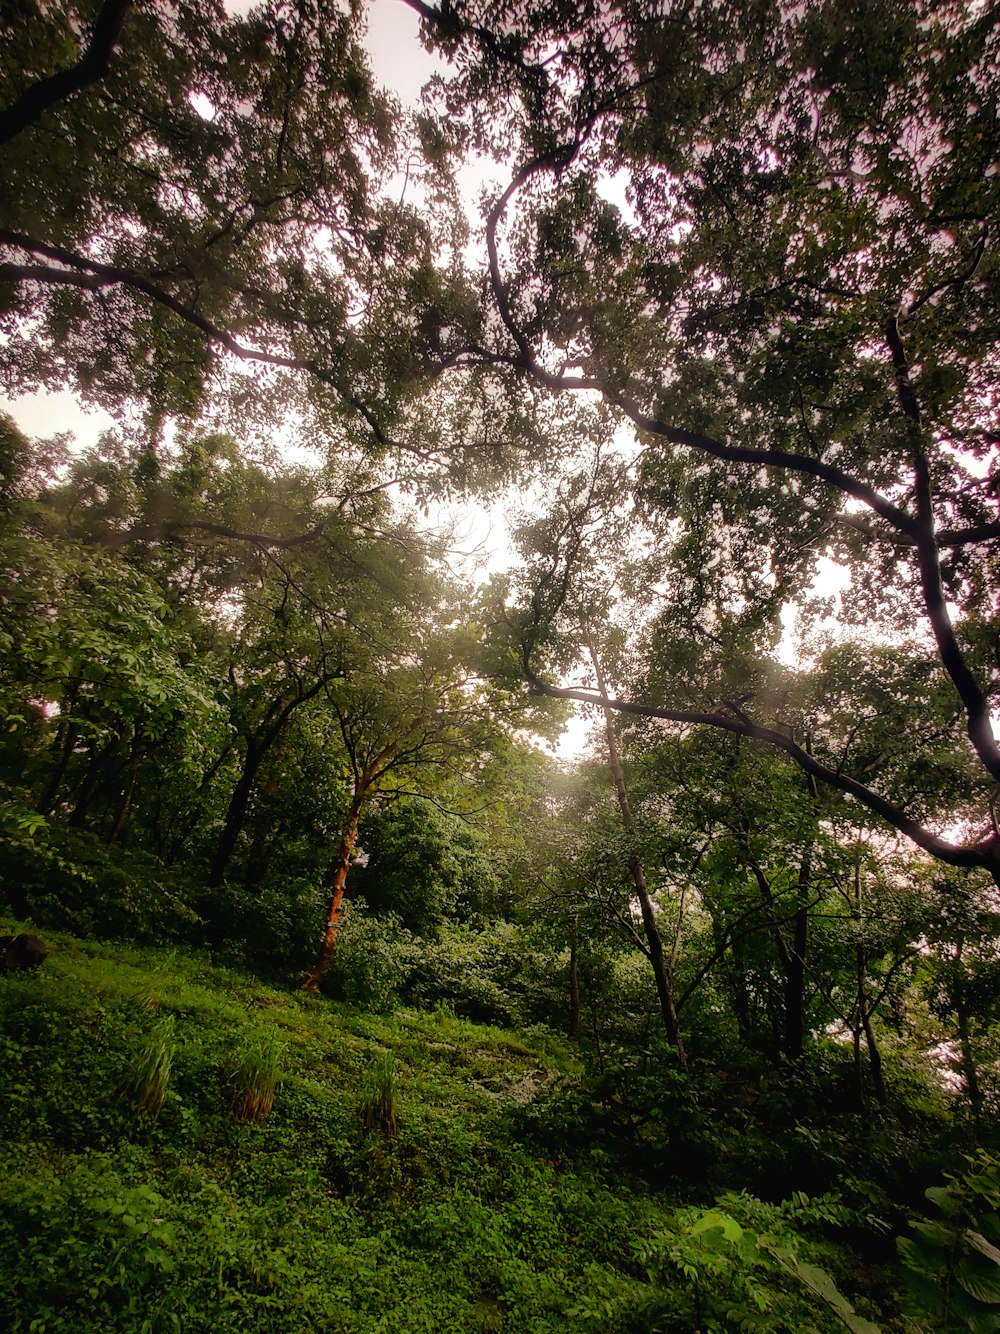 a forest with trees and plants